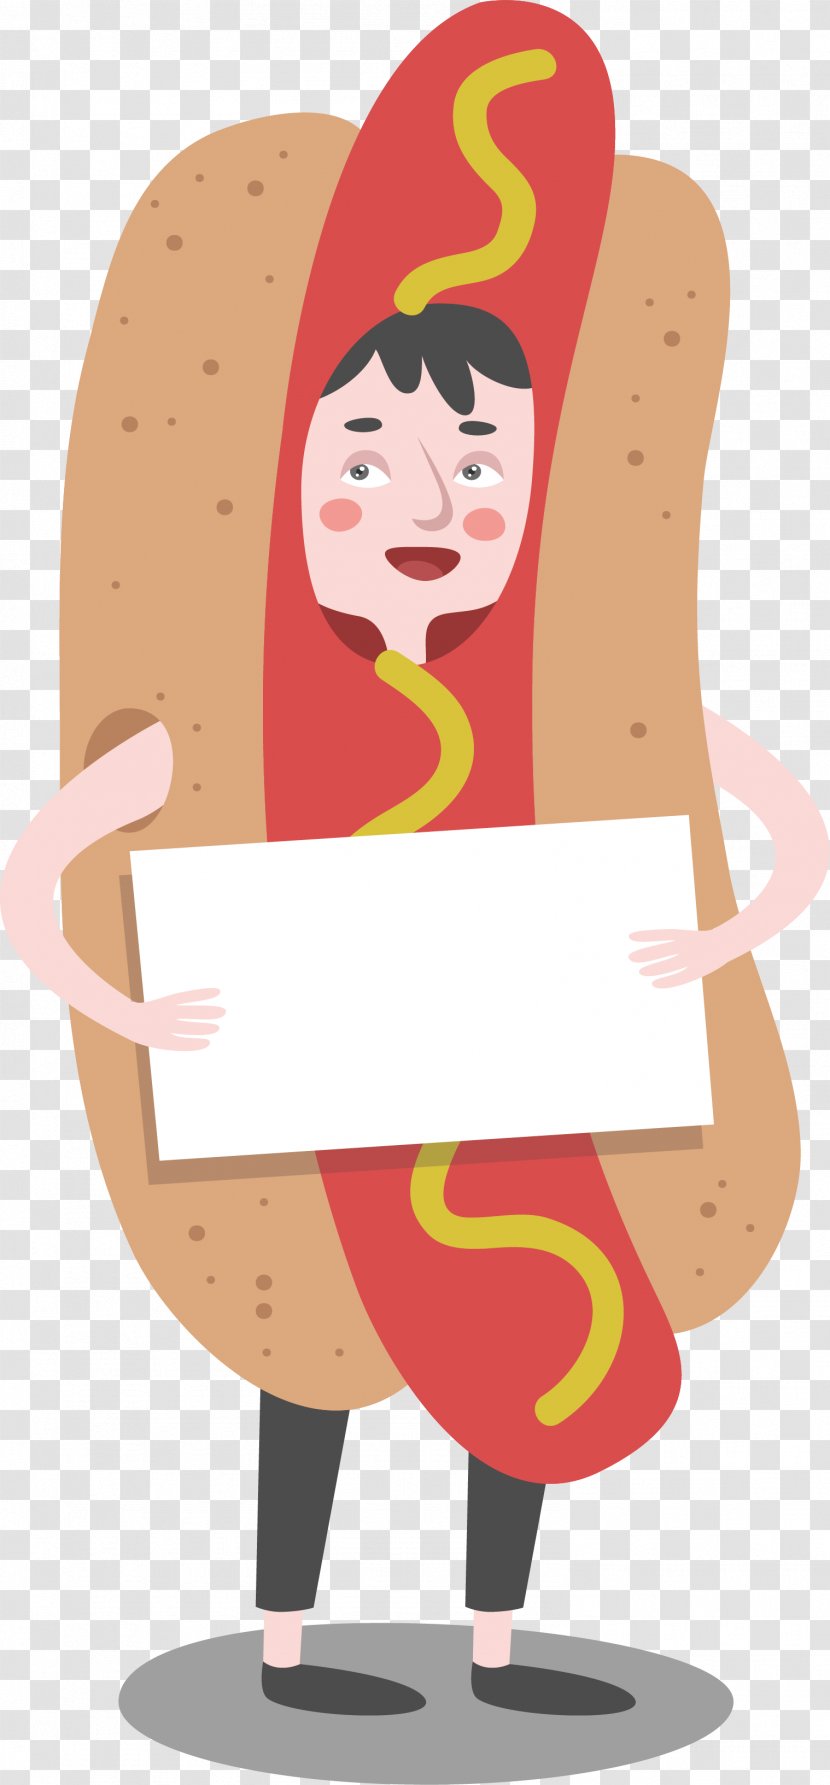 Hot Dog Hamburger Sausage - Silhouette - The Man Who Dressed Dogs Transparent PNG